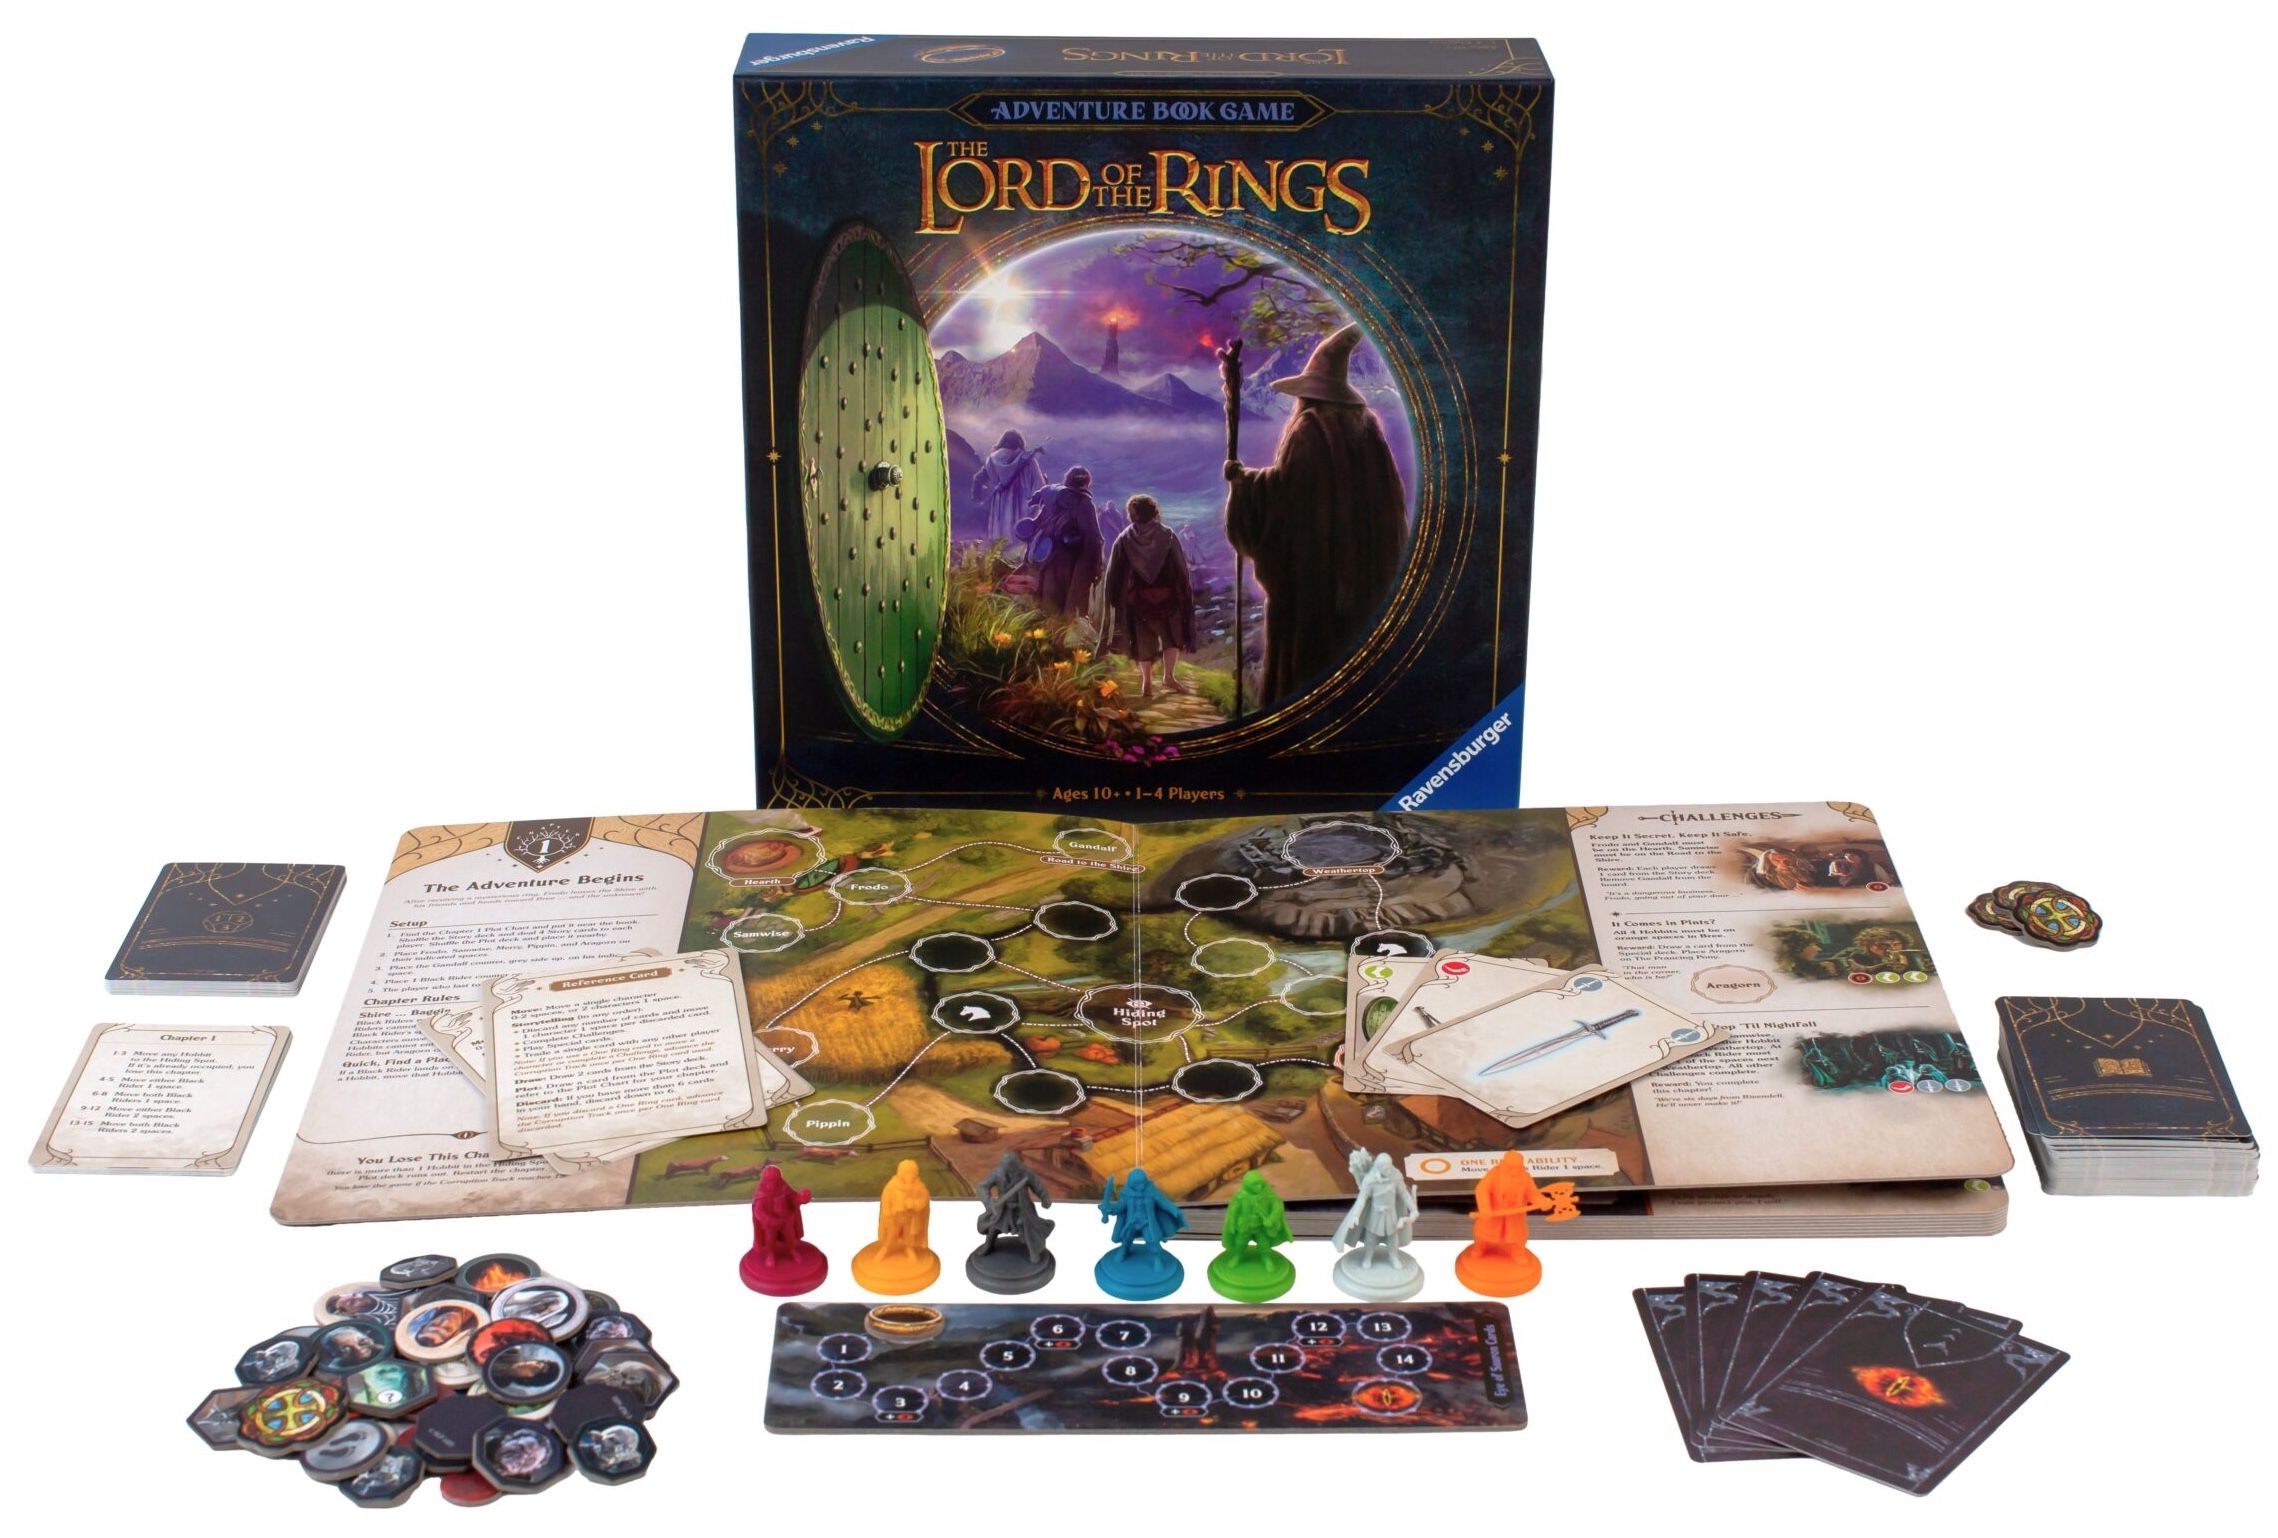 The Lord Of The Rings Adventure Book Game - Ravensburger